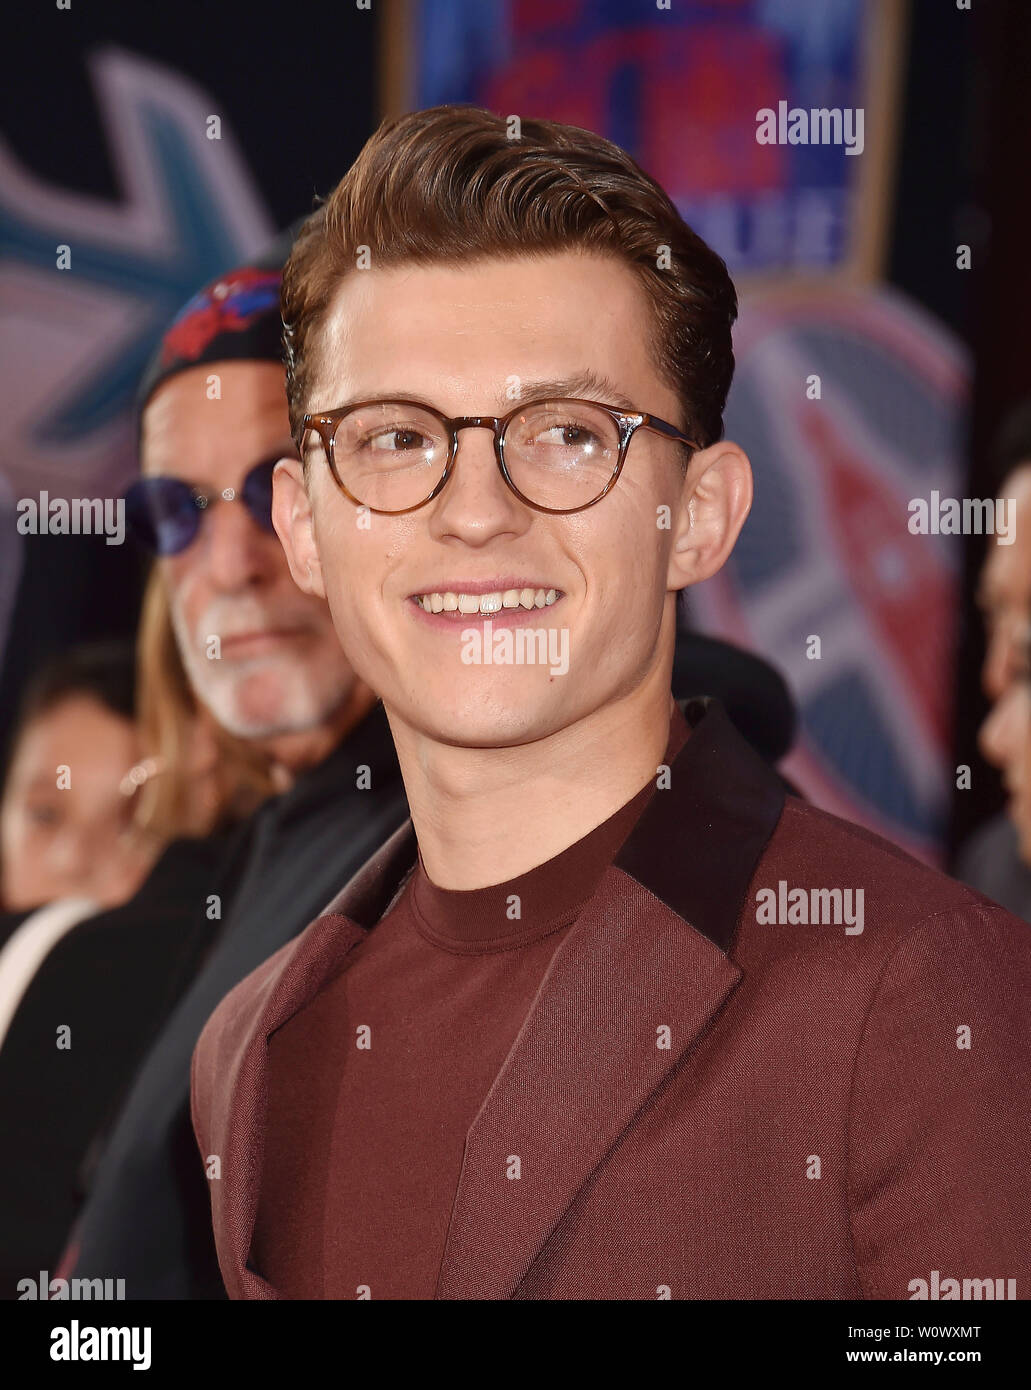 HOLLYWOOD, CA - JUNE 26: Tom Holland attends the premiere of Sony Pictures' 'Spider-Man Far From Home' at TCL Chinese Theatre on June 26, 2019 in Hollywood, California. Stock Photo